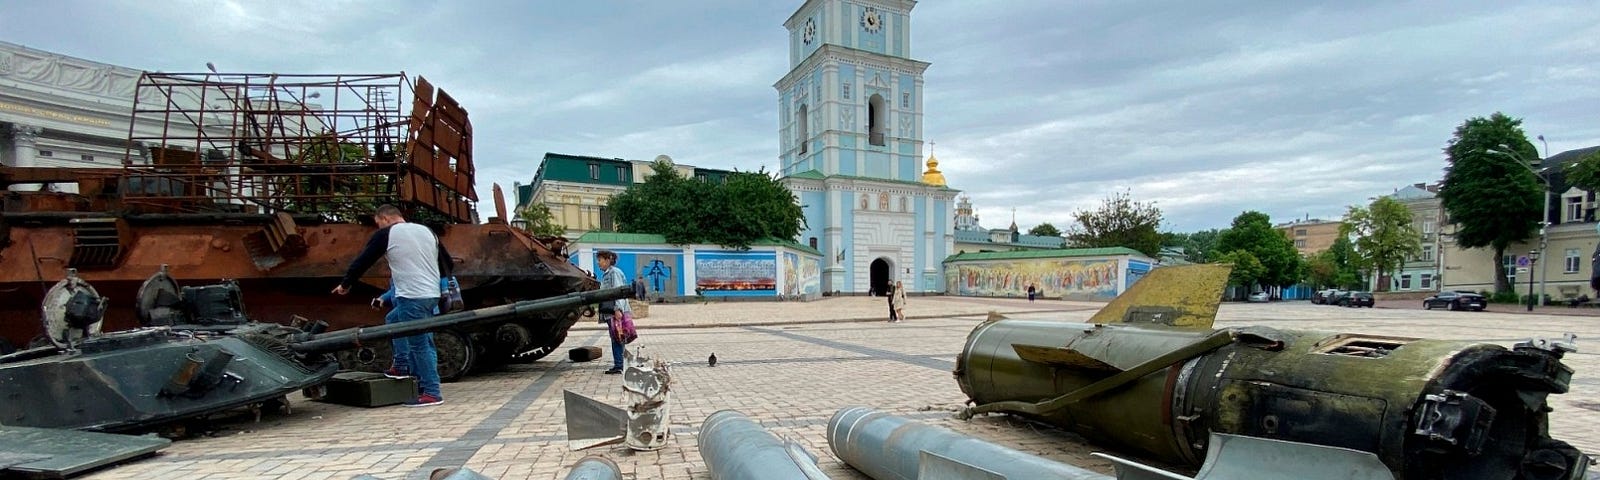 Russian weapons captured by Ukrainian forces seen in front of St. Michael’s Monastery in Kyiv, Ukraine, May 31, 2022. Photo by Ulf Mauder/Picture-Alliance/DPA/AP